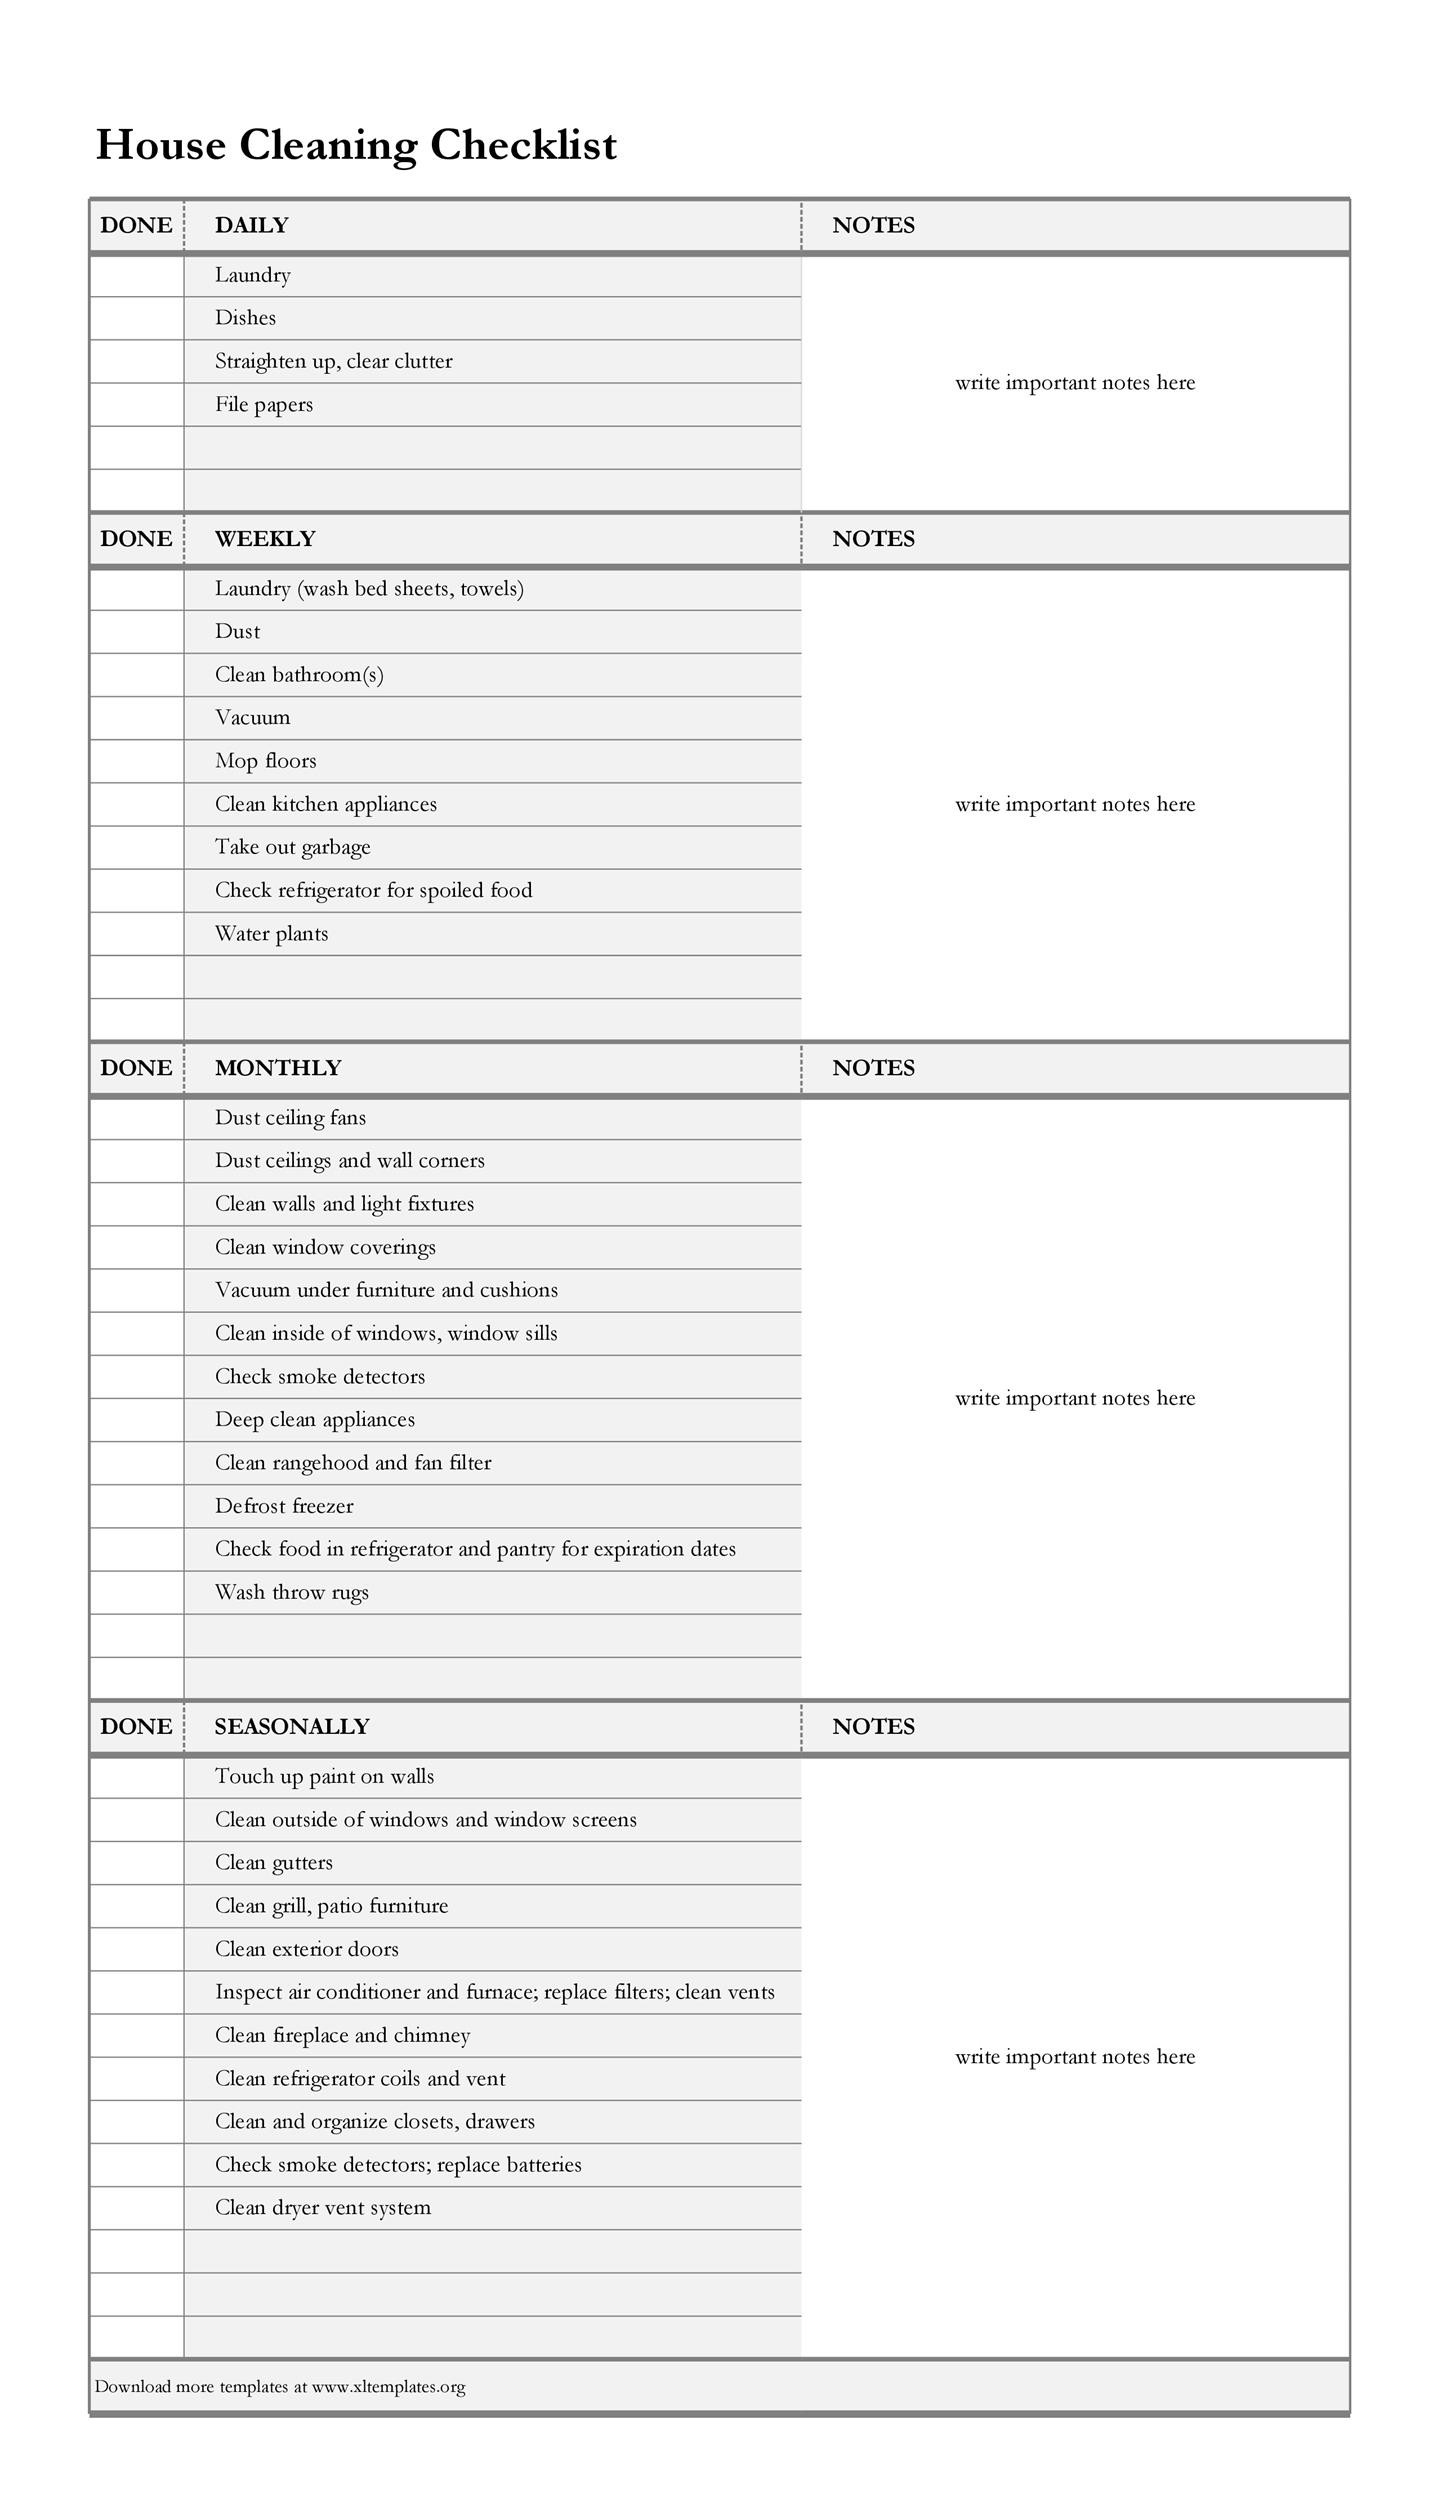 Free house cleaning checklist 05